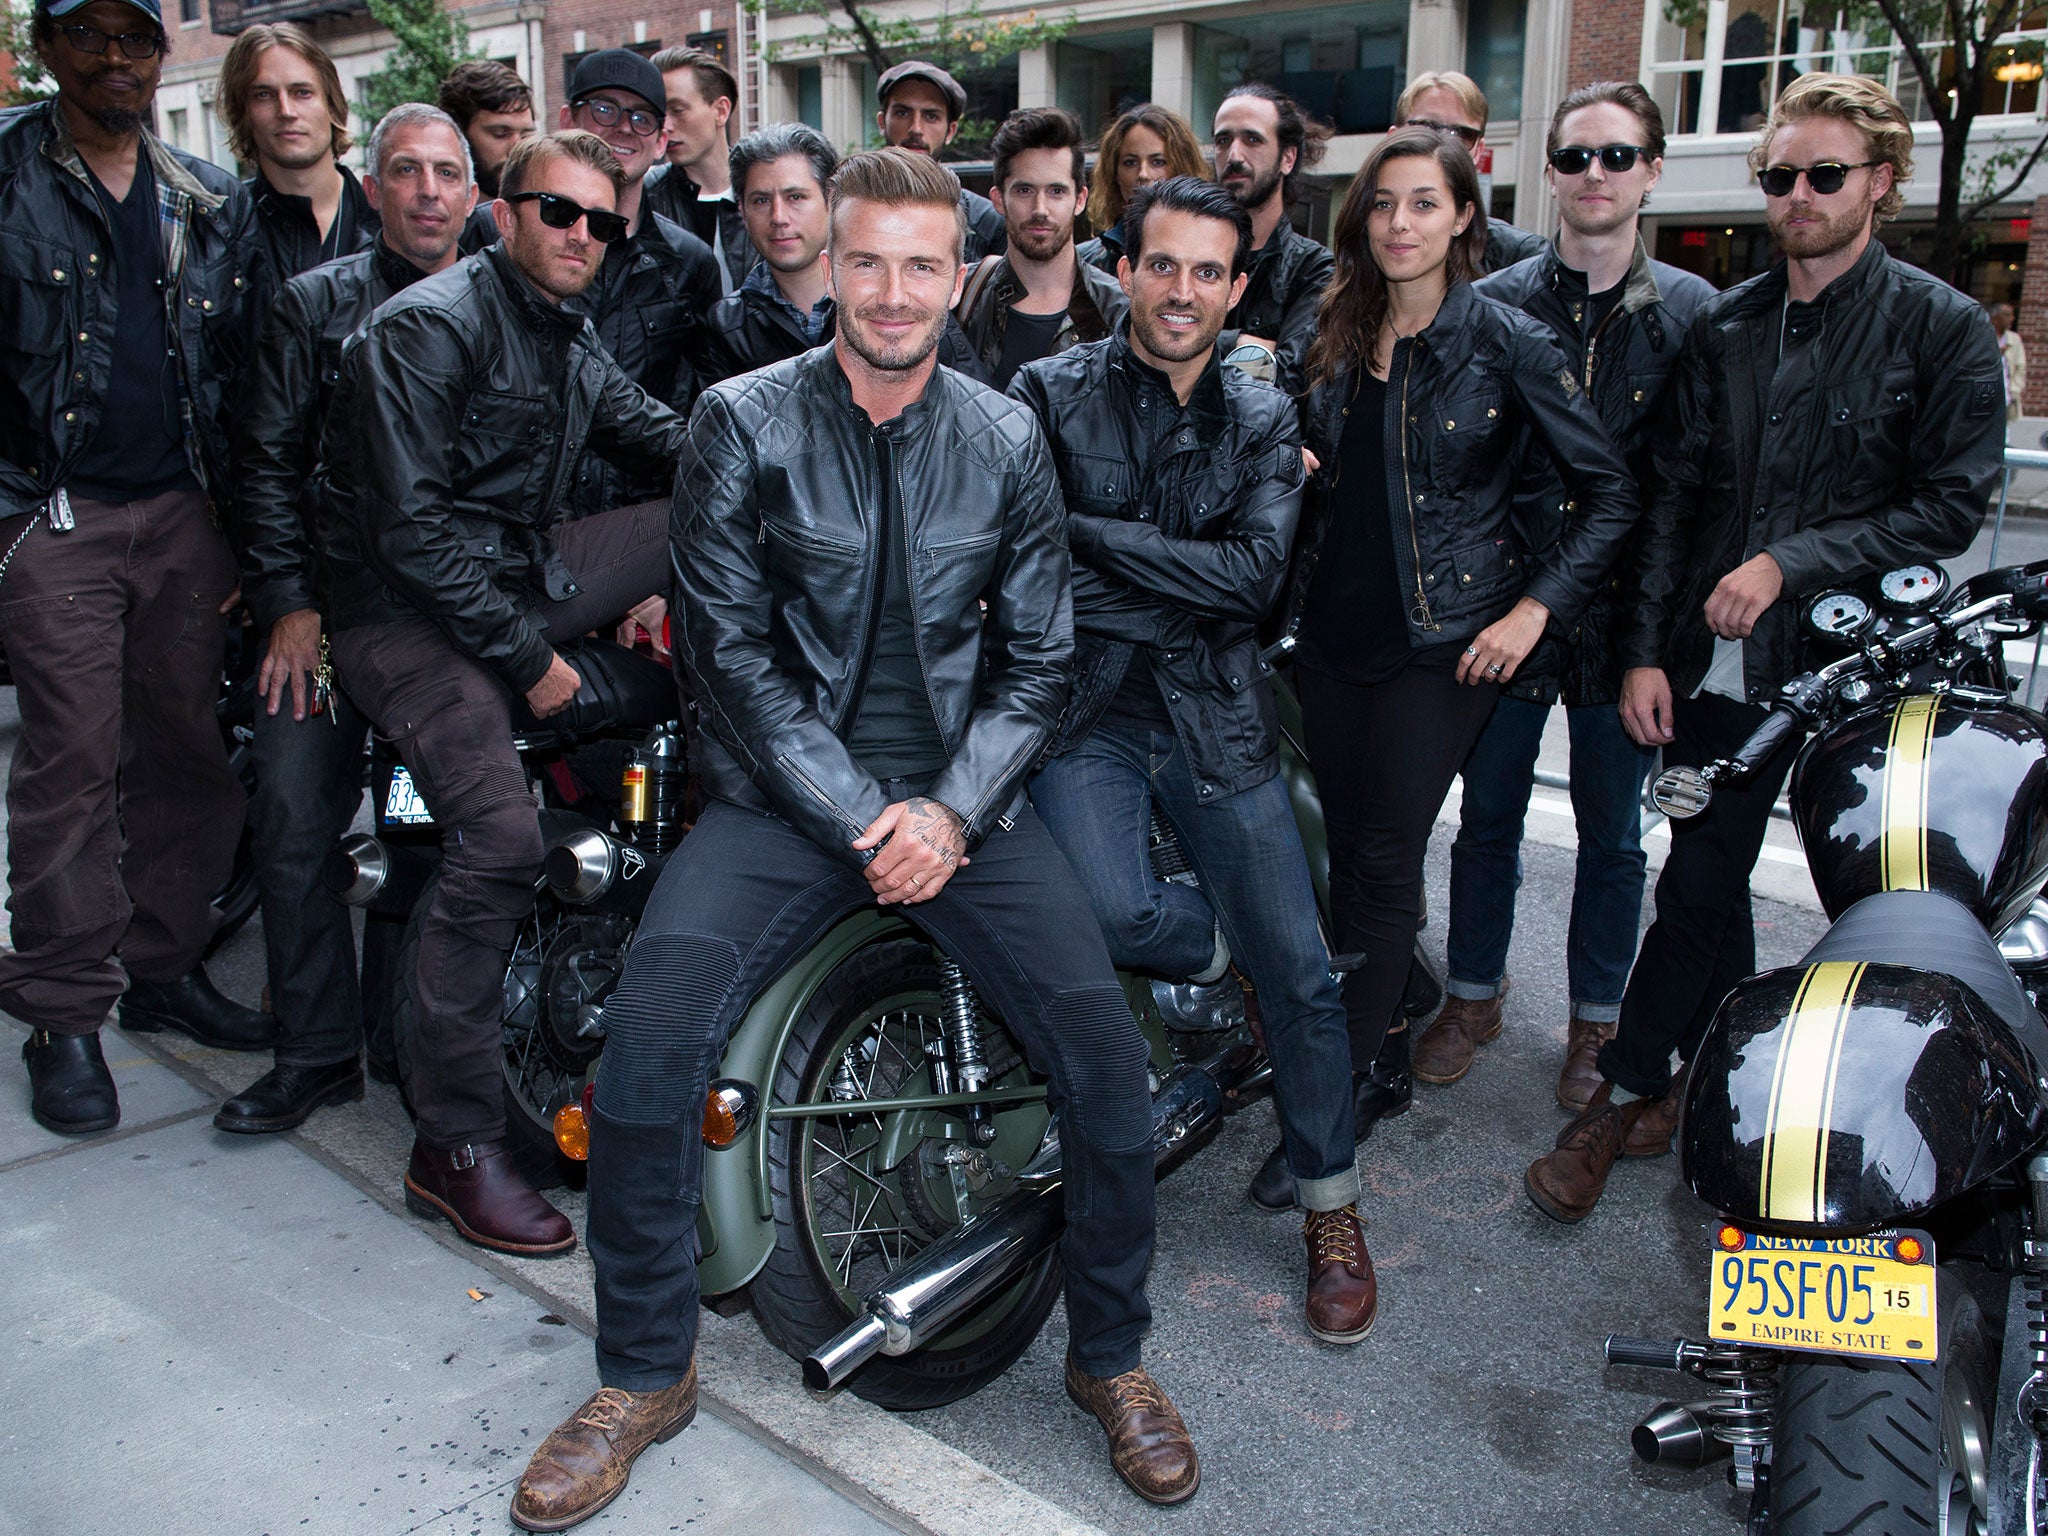 Belstaff, promoted by David Beckham, began producing waterproof jackets for motorcyclists in 1924